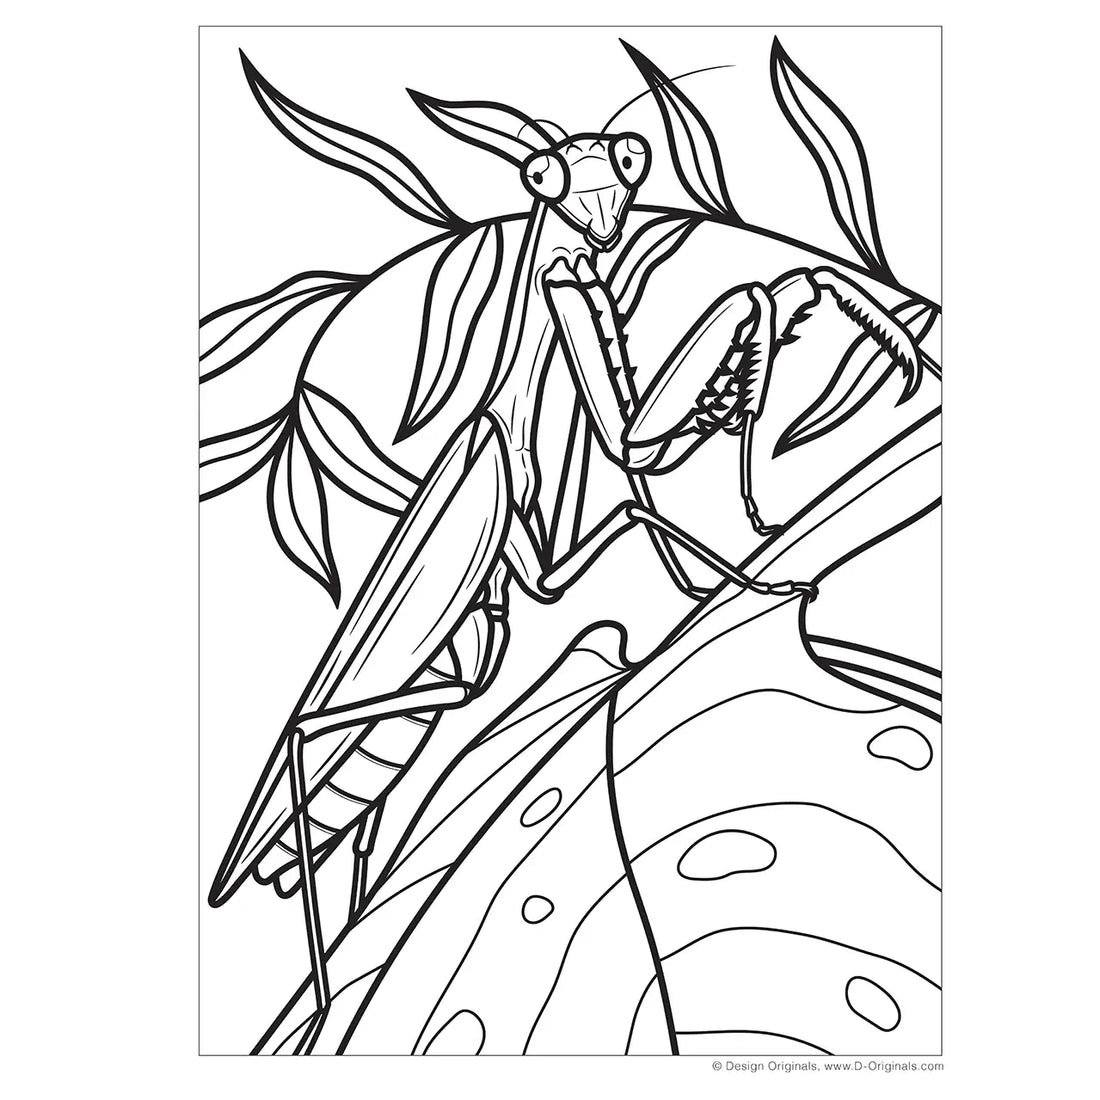 Super Cool Bugs & Spiders Coloring Book Preview #3